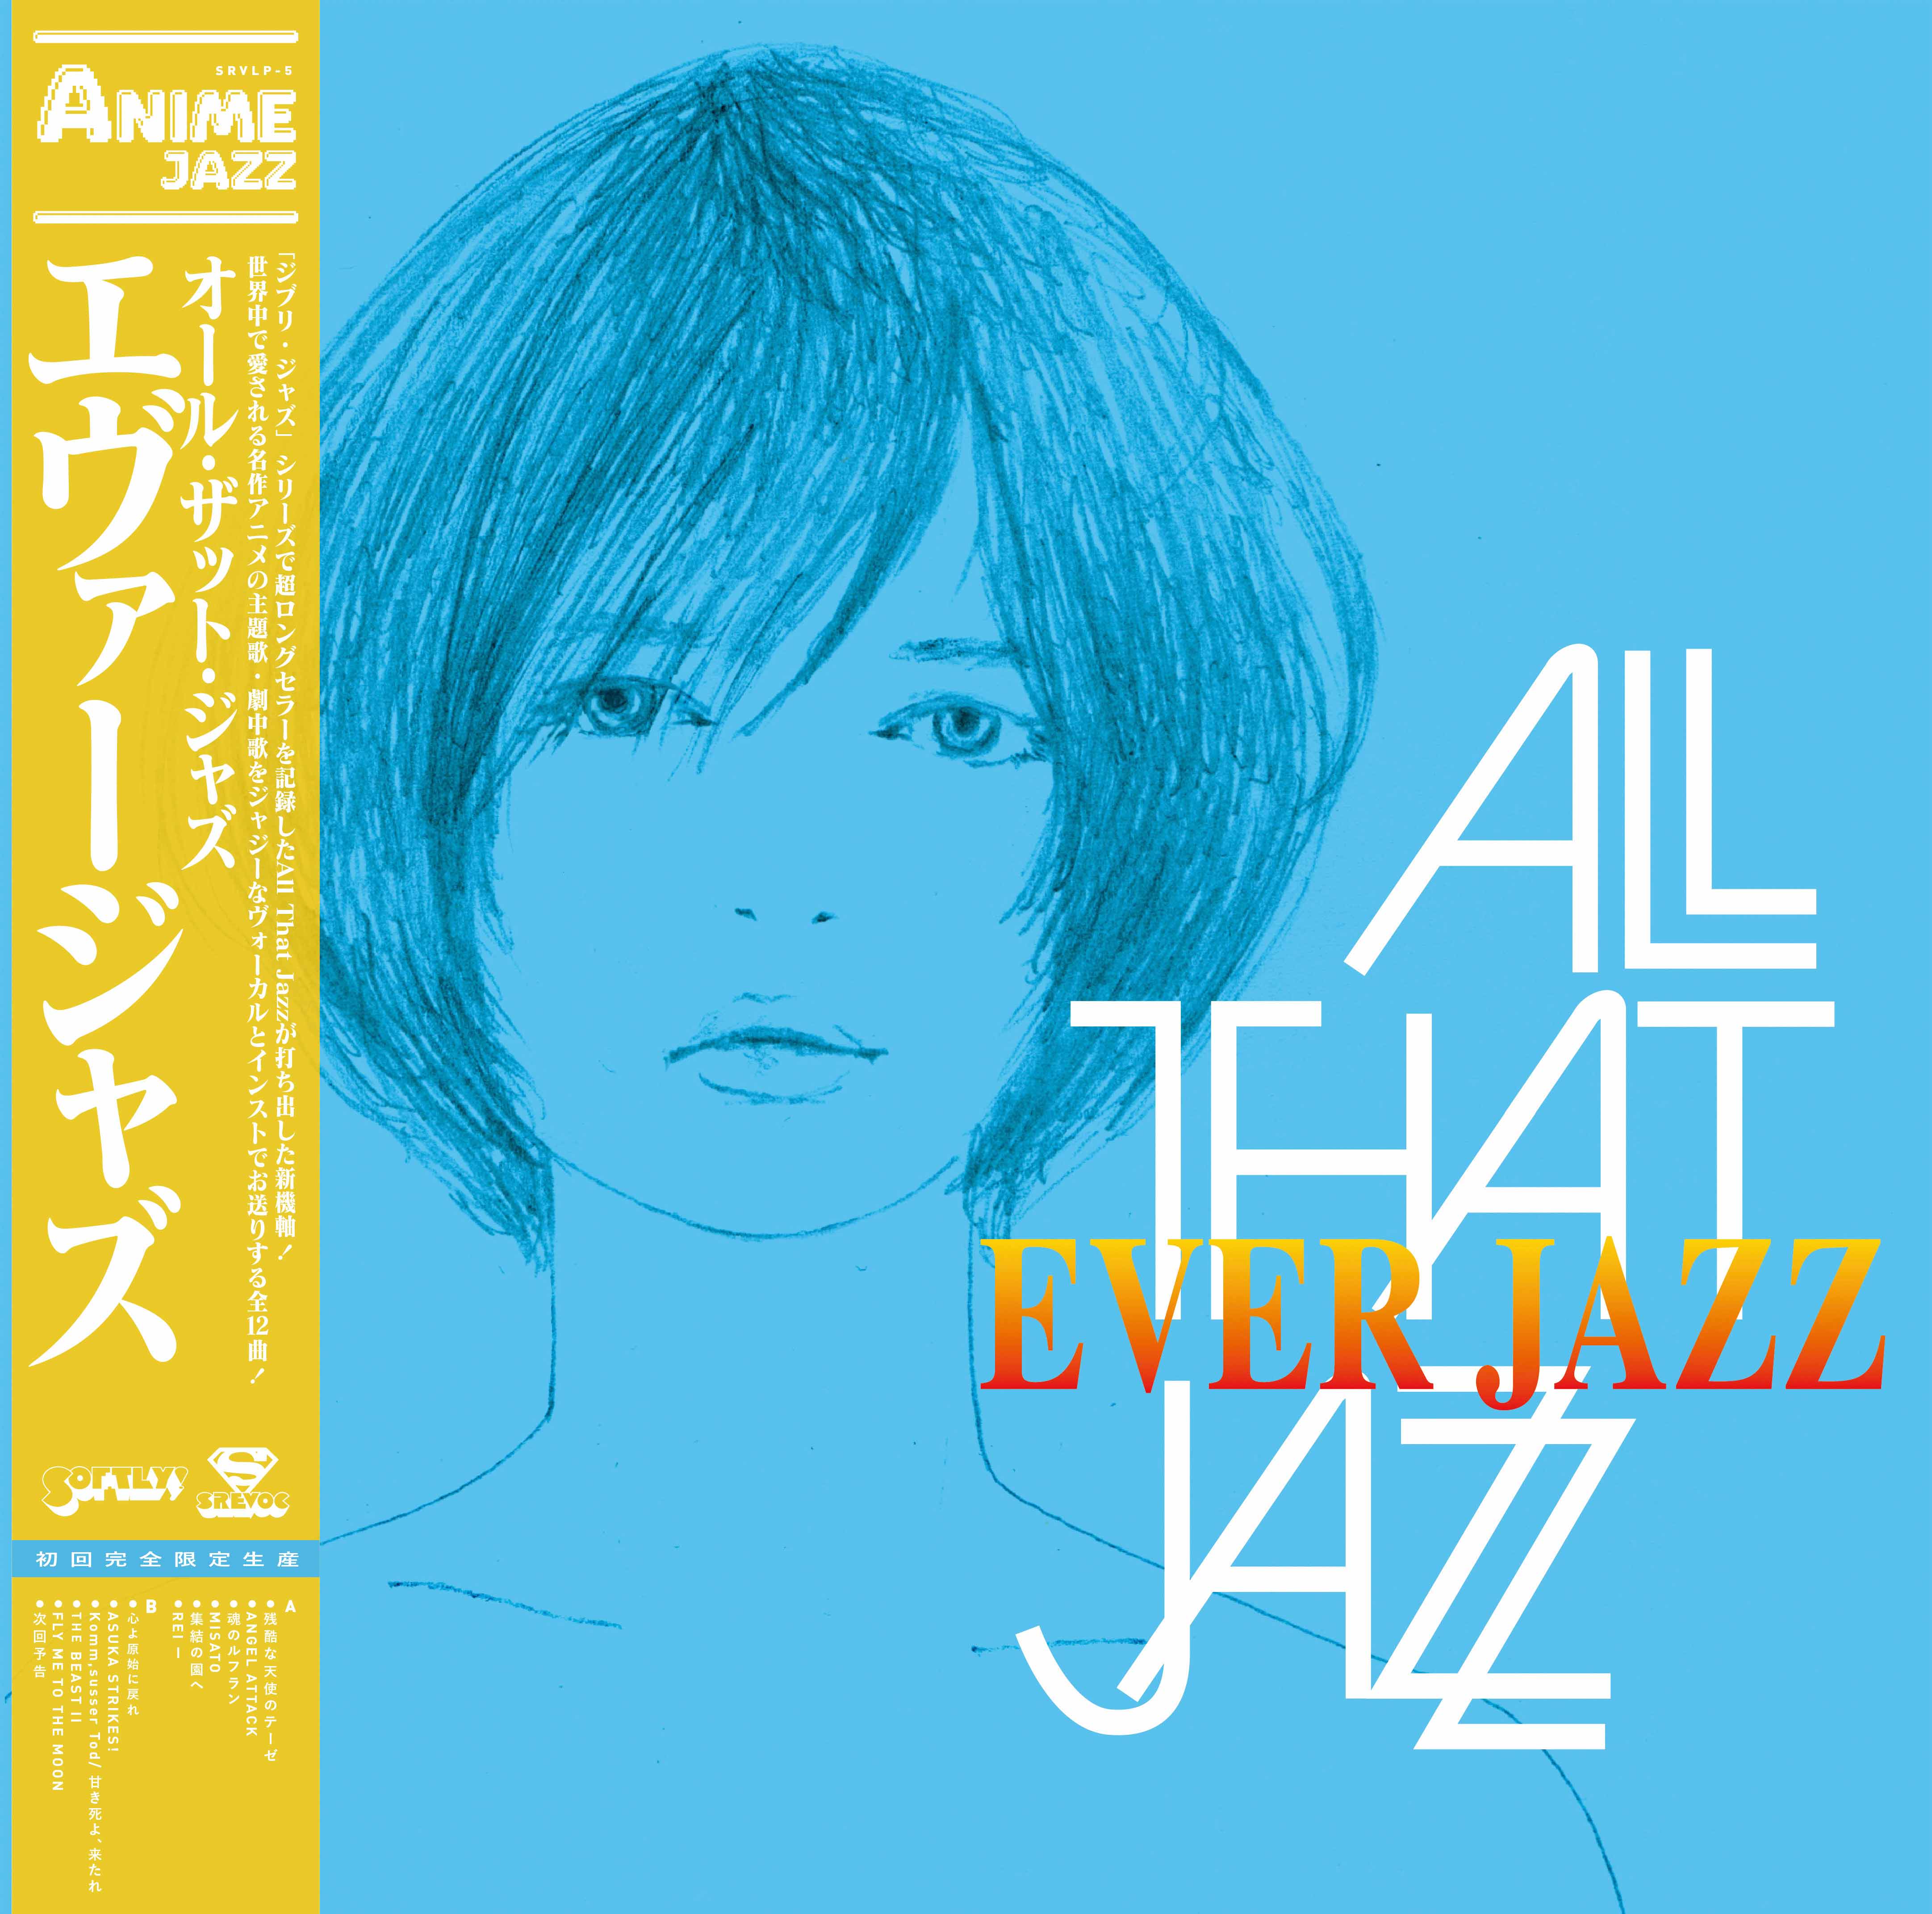 ALL THAT JAZZ「EVER JAZZ」